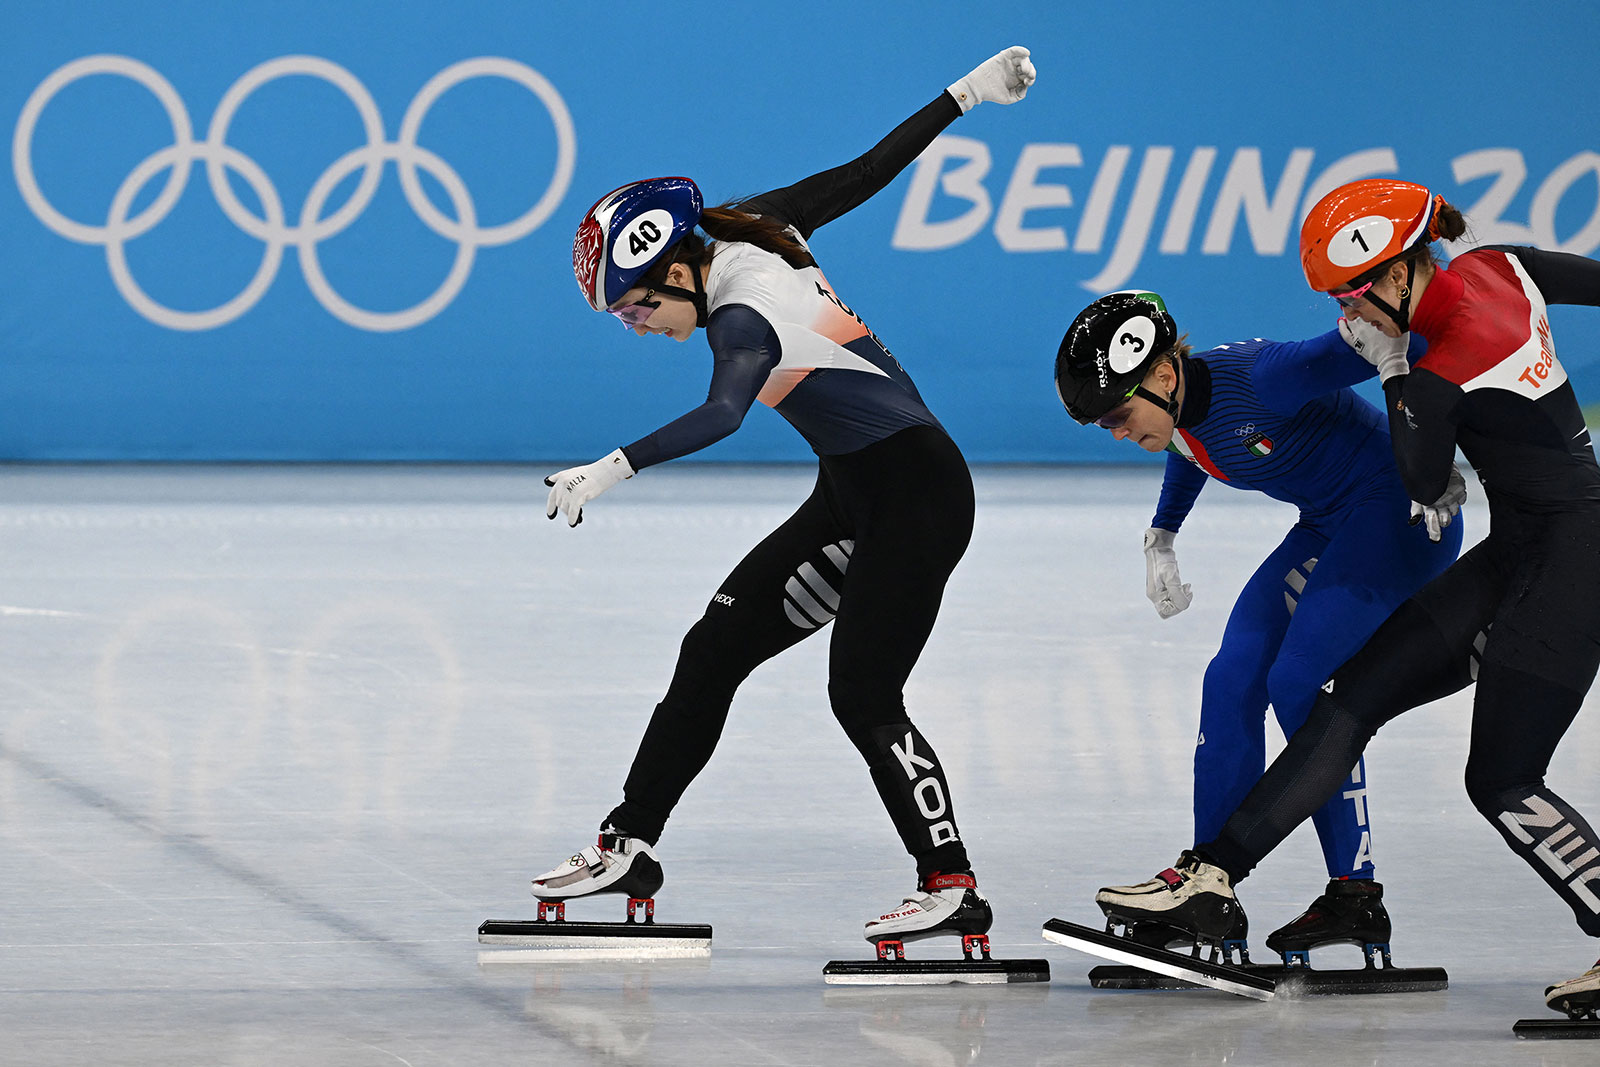 South Korea's Choi Min-jeong crosses the finish line ahead of Italy's Arianna Fontana and Dutch skater Suzanne Schulting to win the gold medal in the 1,500m short track on February 16.